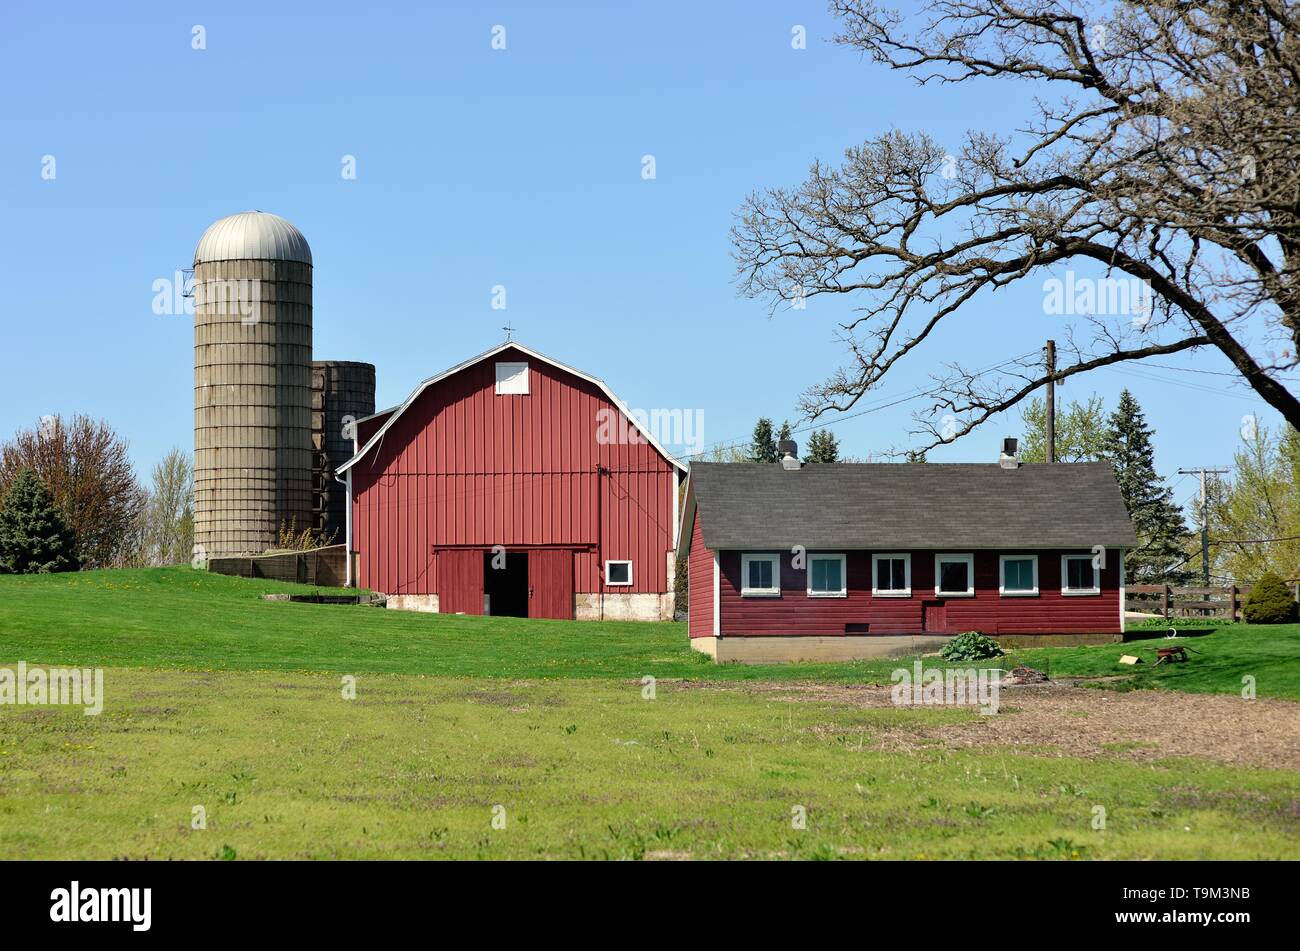 South Elgin, Illinois, USA. A modern red barn surrounded by silos and a shed form the structures on a small agricultural spread. Stock Photo